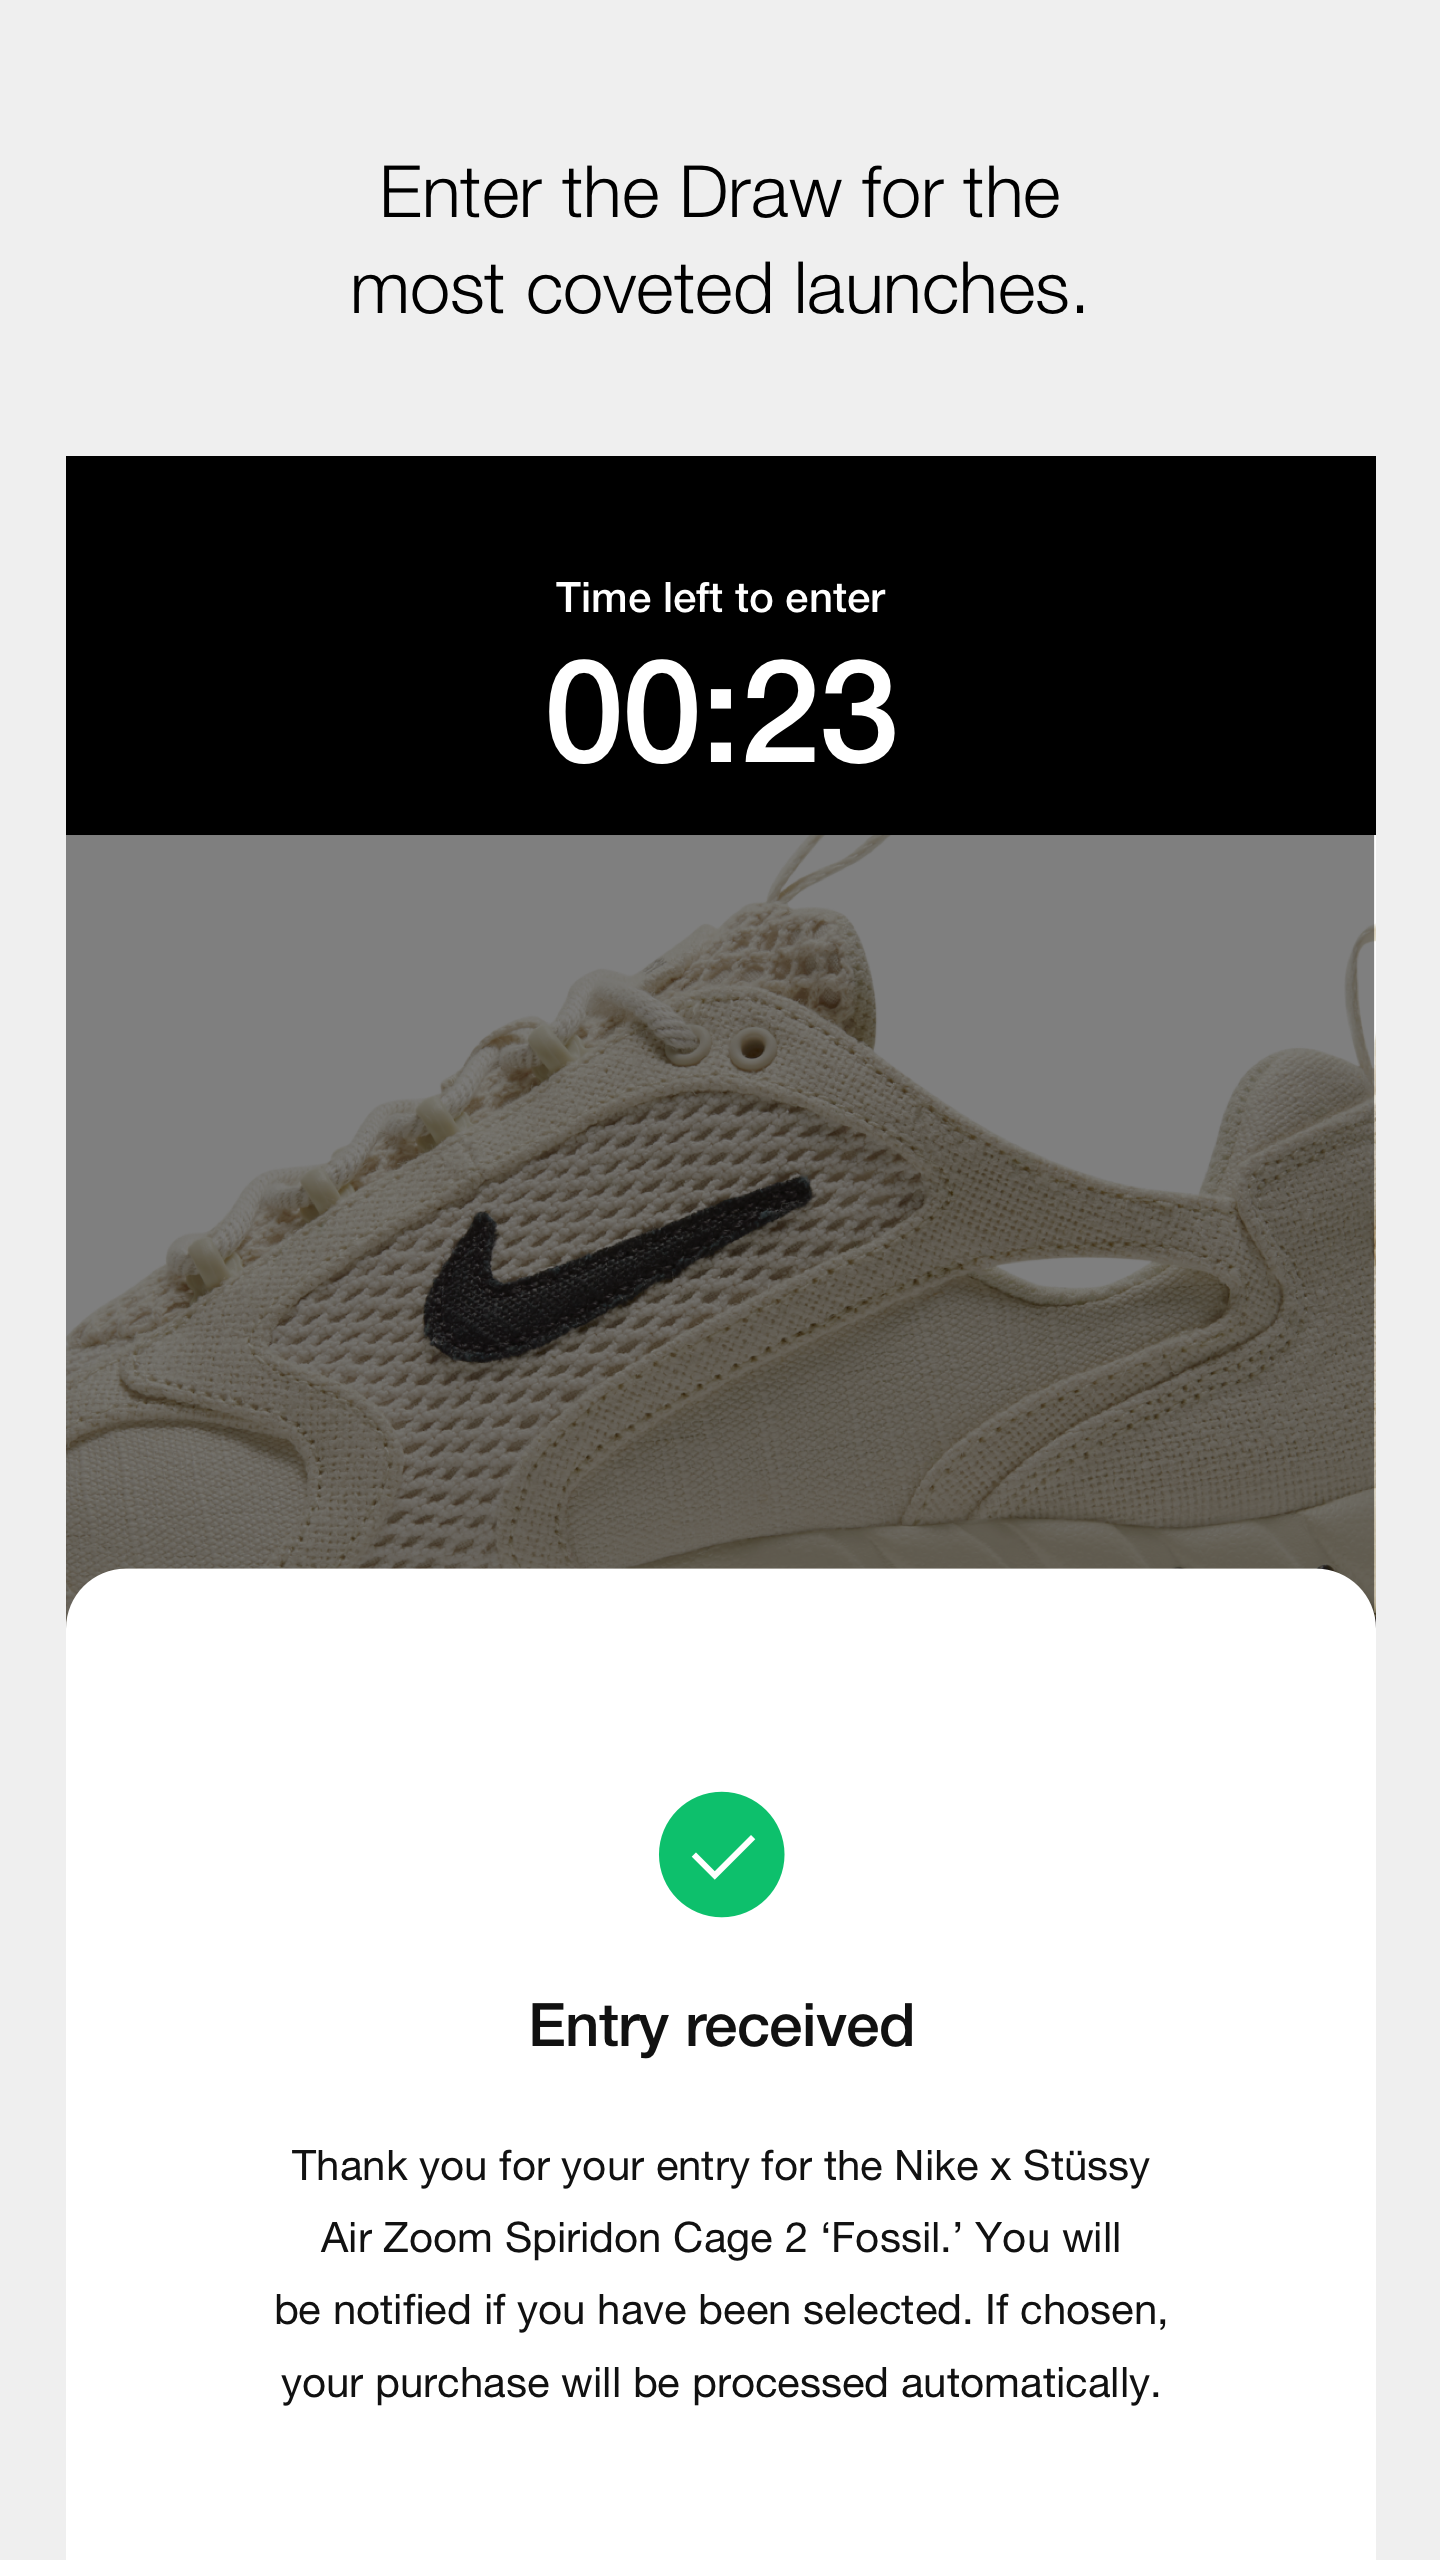 Nike SNKRS: Shoes & Streetwear APK 3.22.1 for Android – Download Nike SNKRS:  Shoes & Streetwear APK Latest Version from APKFab.com